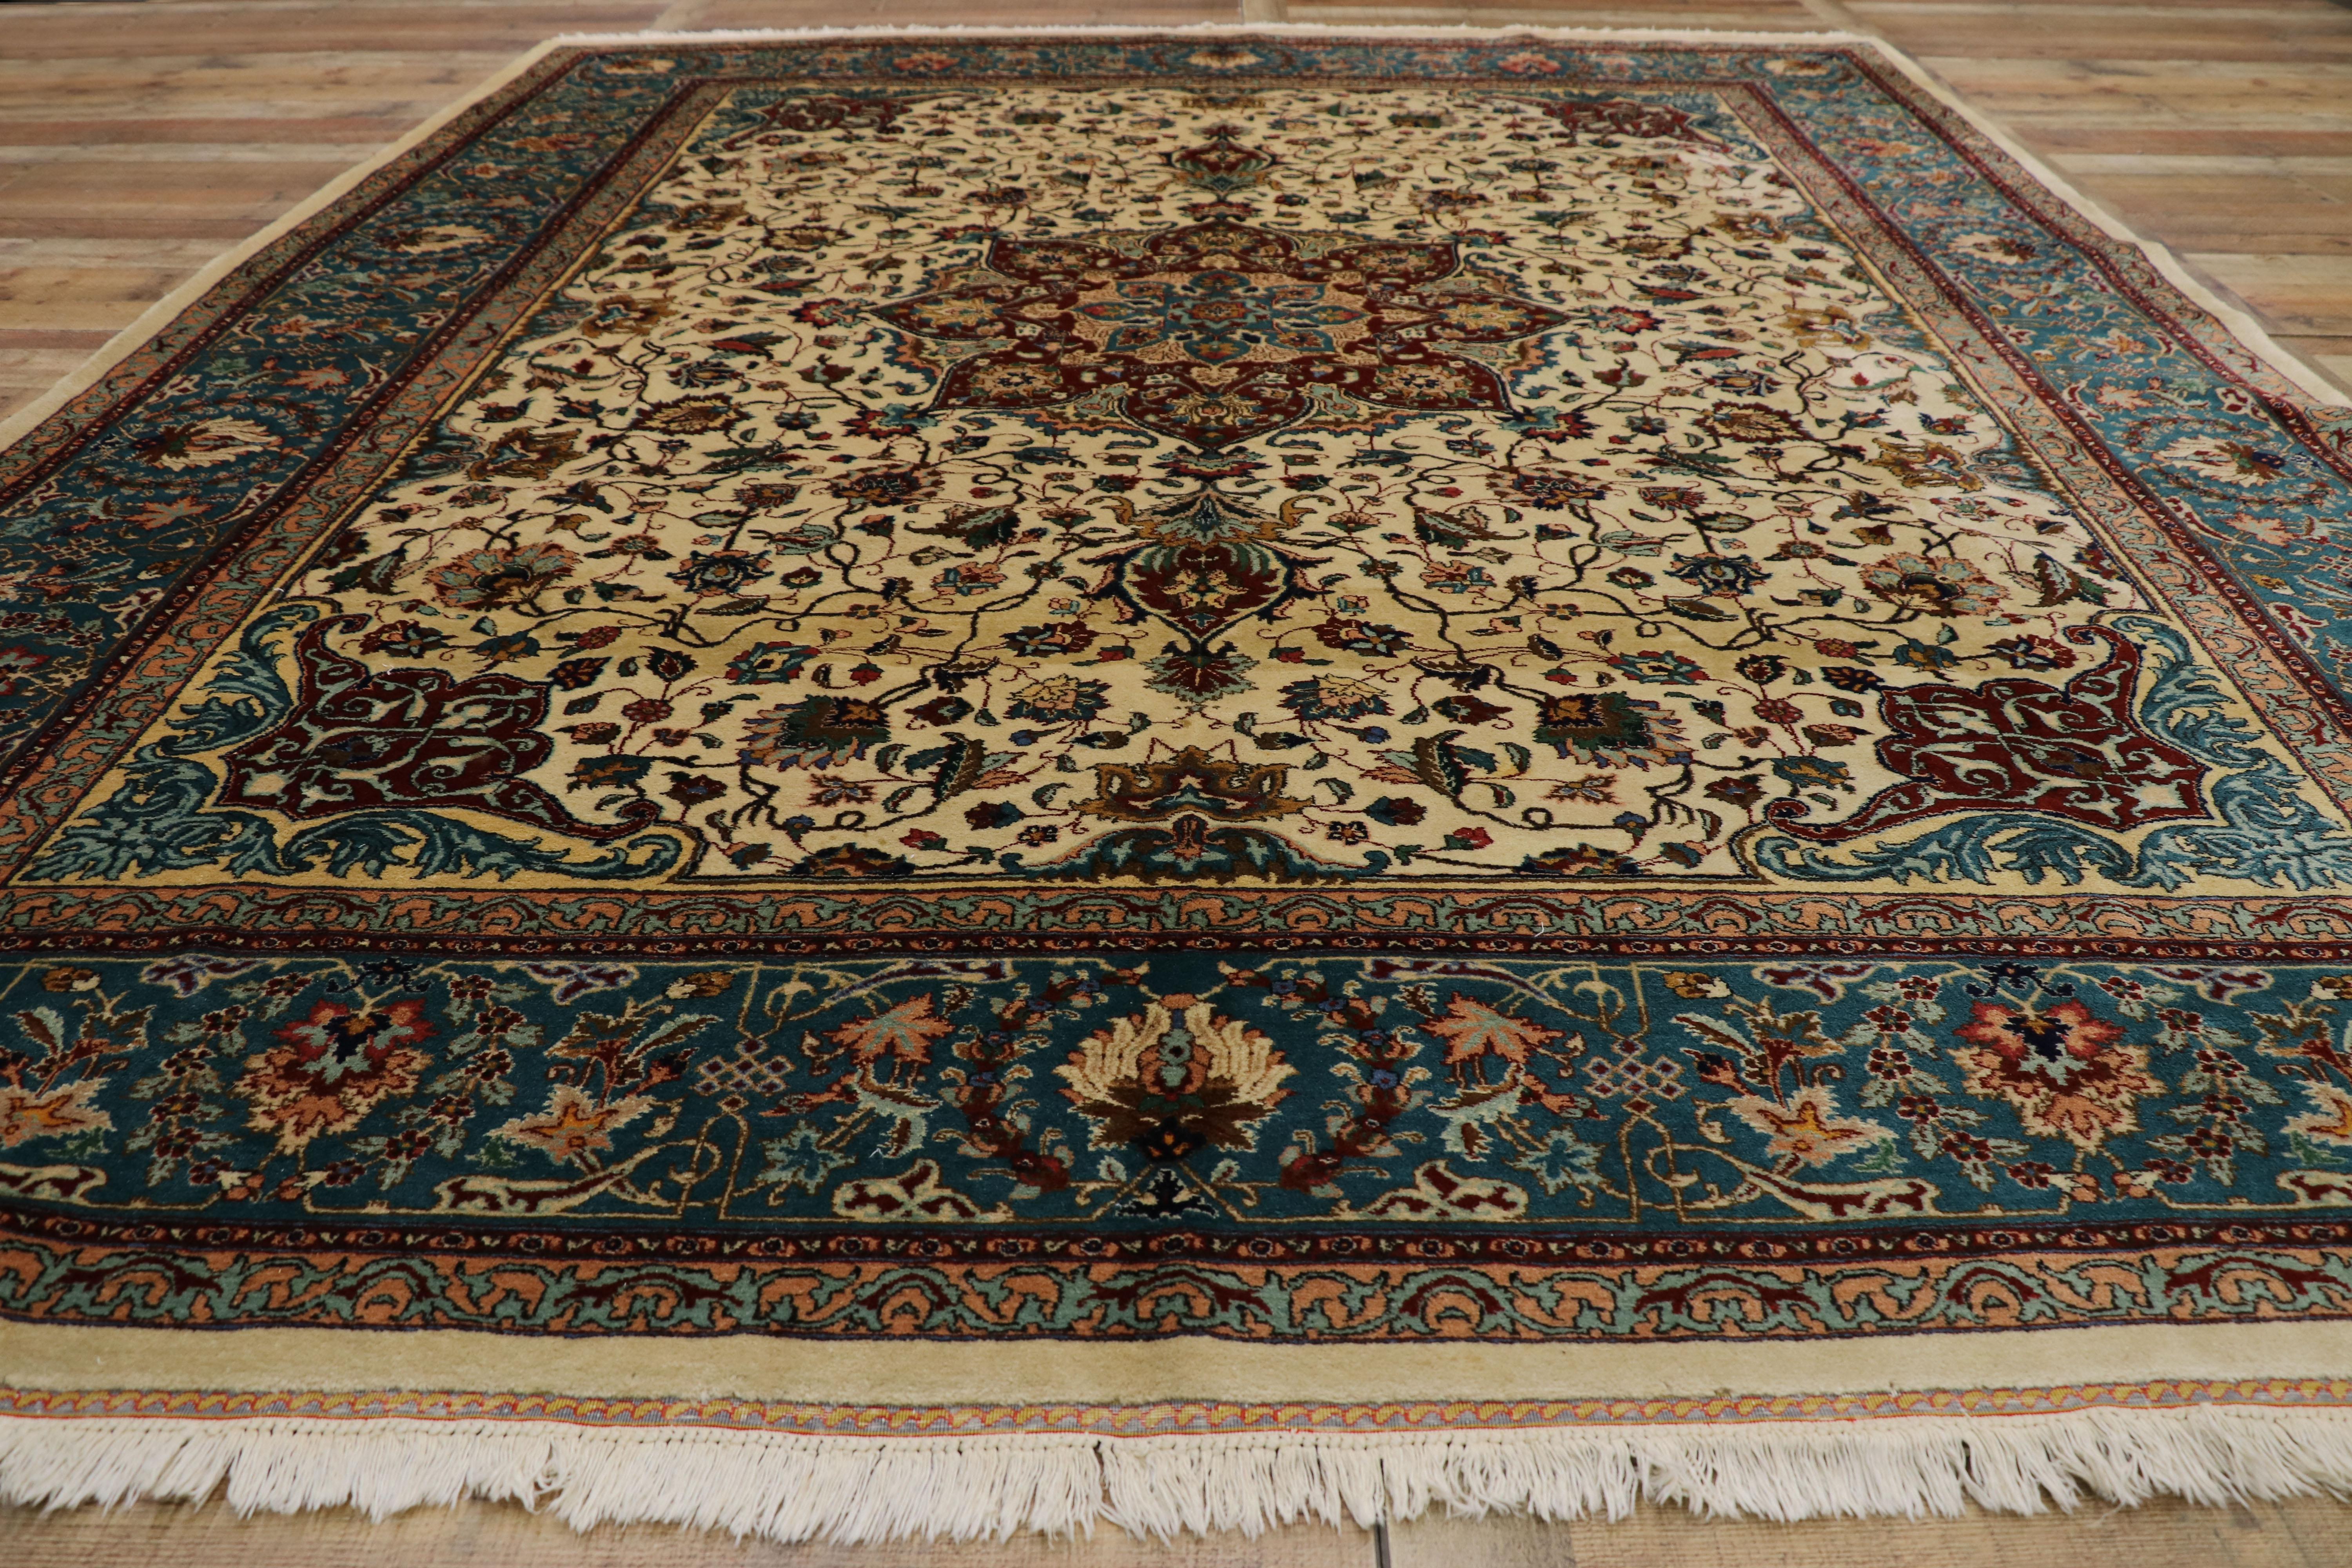 Vintage Persian Tabriz Rug with Baroque Venetian Style In Good Condition For Sale In Dallas, TX